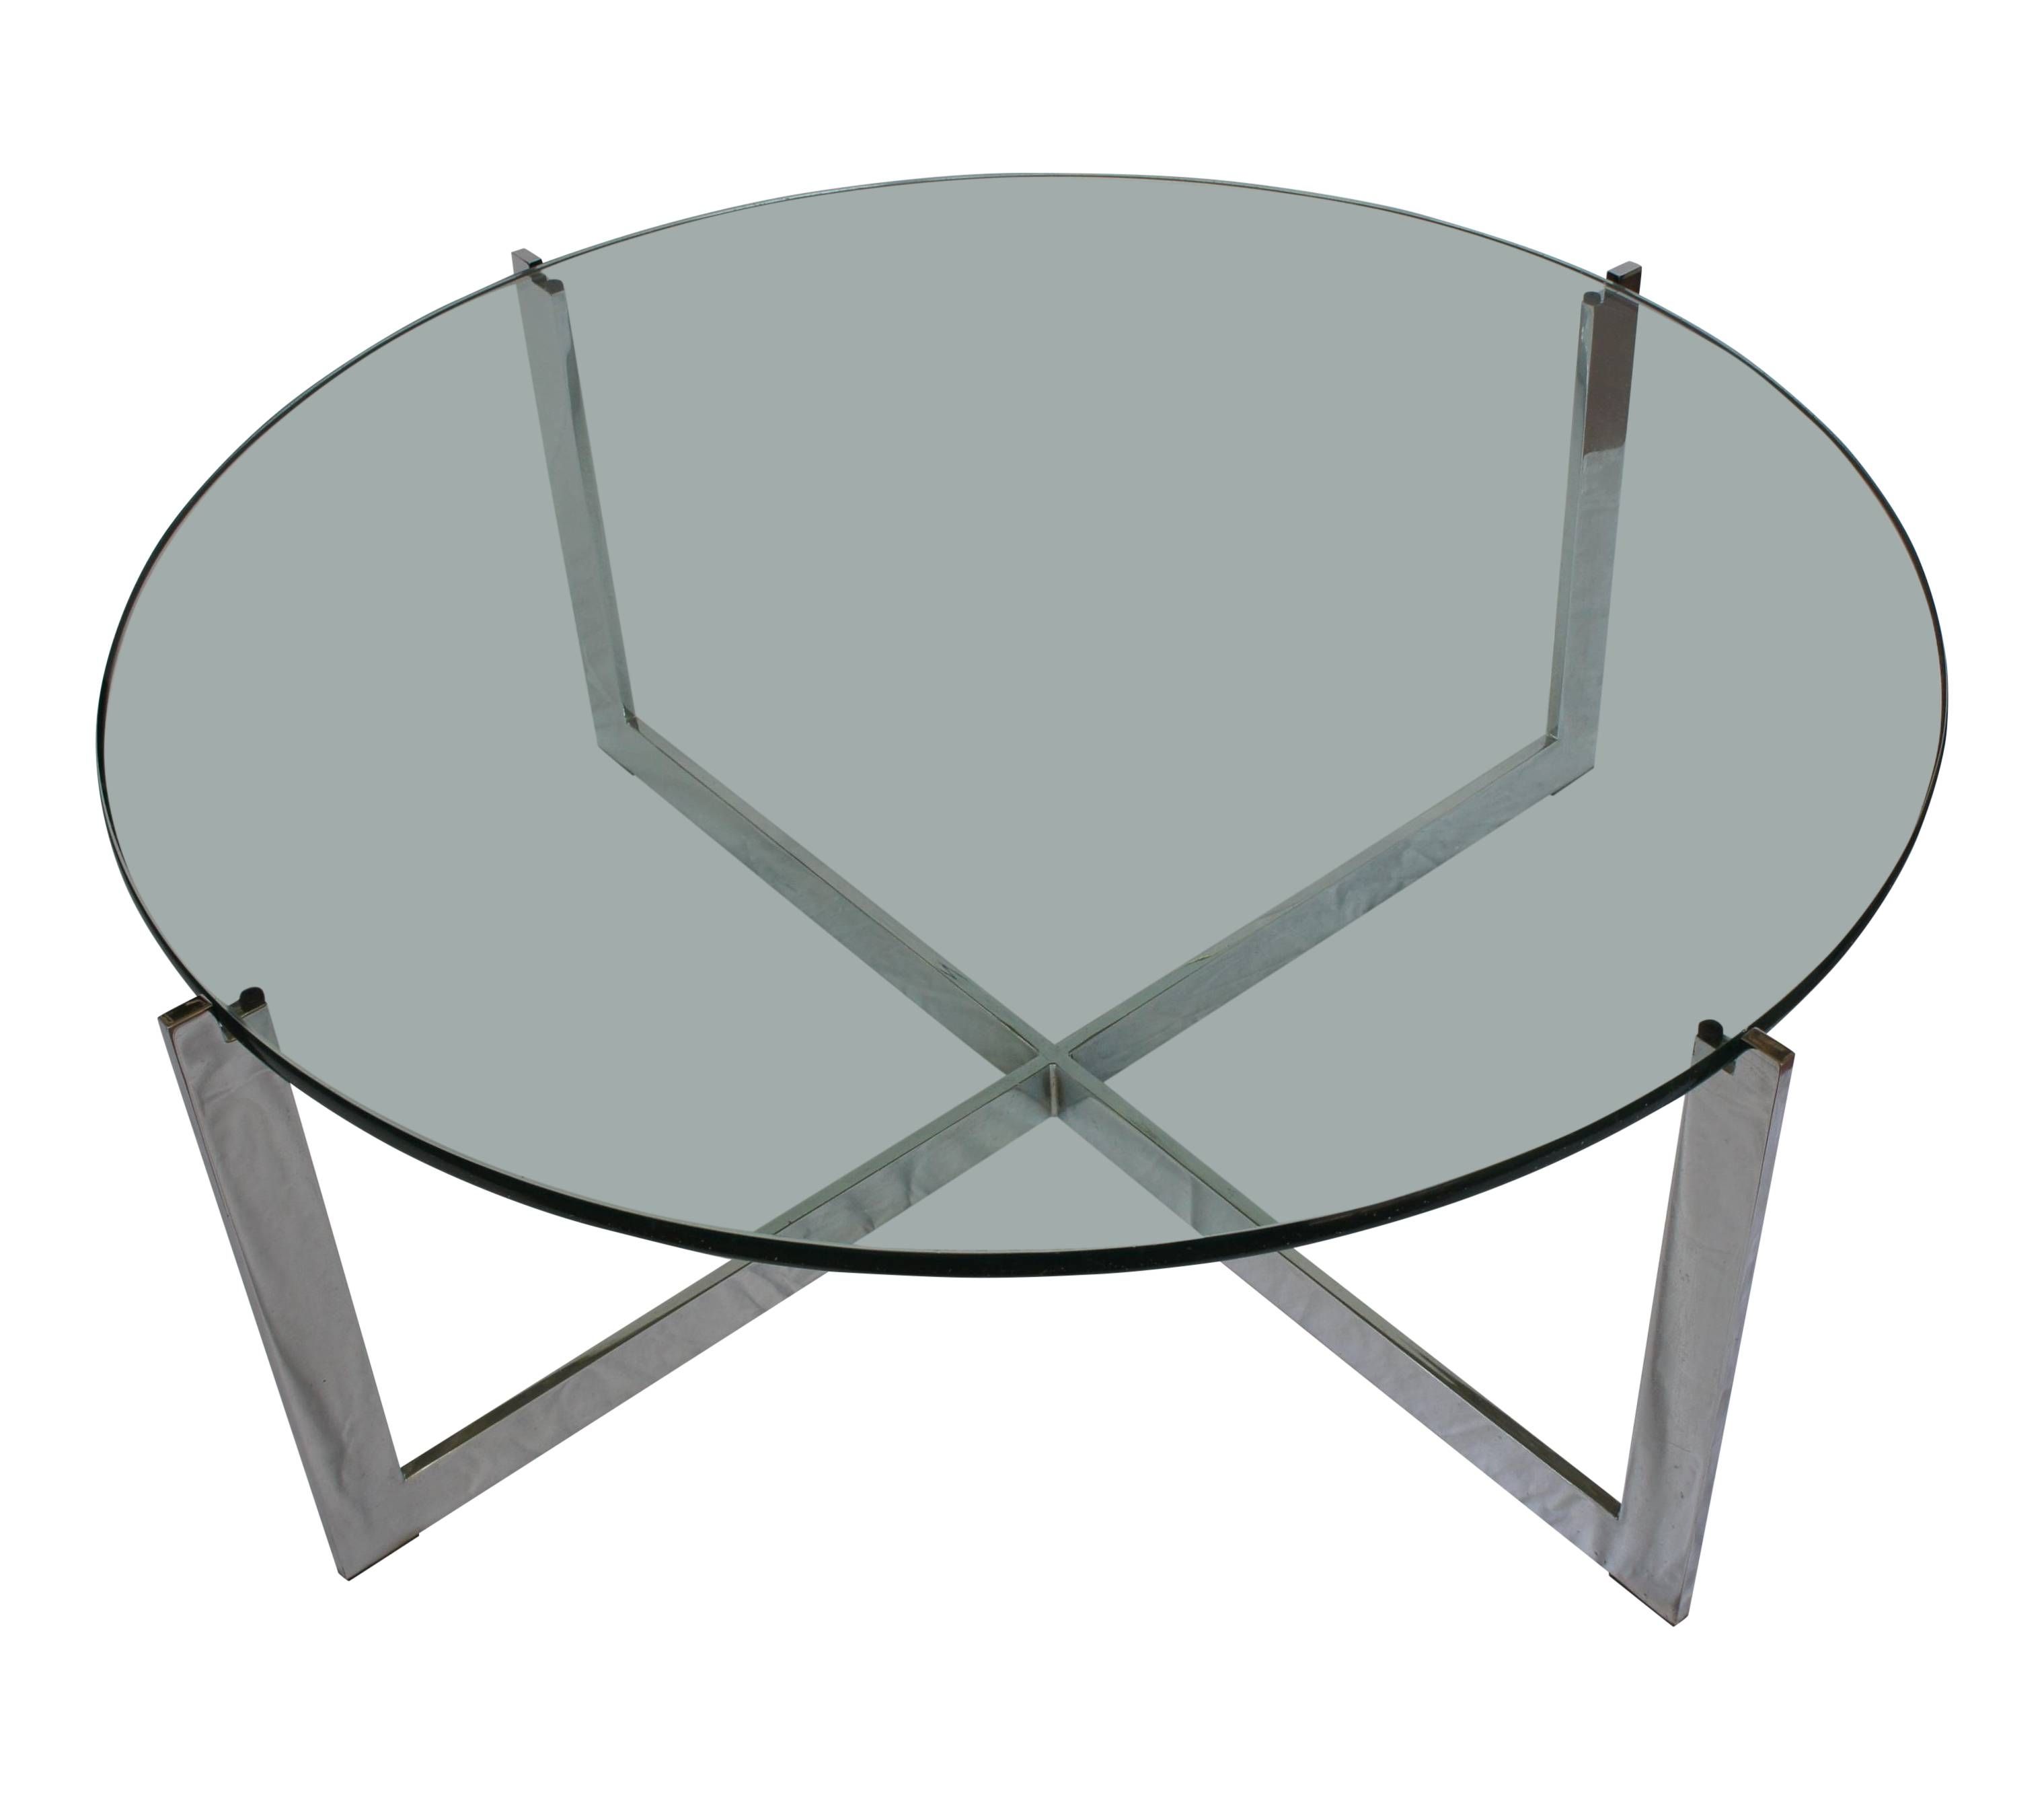 Round Black Glass And Chrome Coffee Table | Coffee Tables Decoration With Chrome Glass Coffee Tables (View 21 of 30)